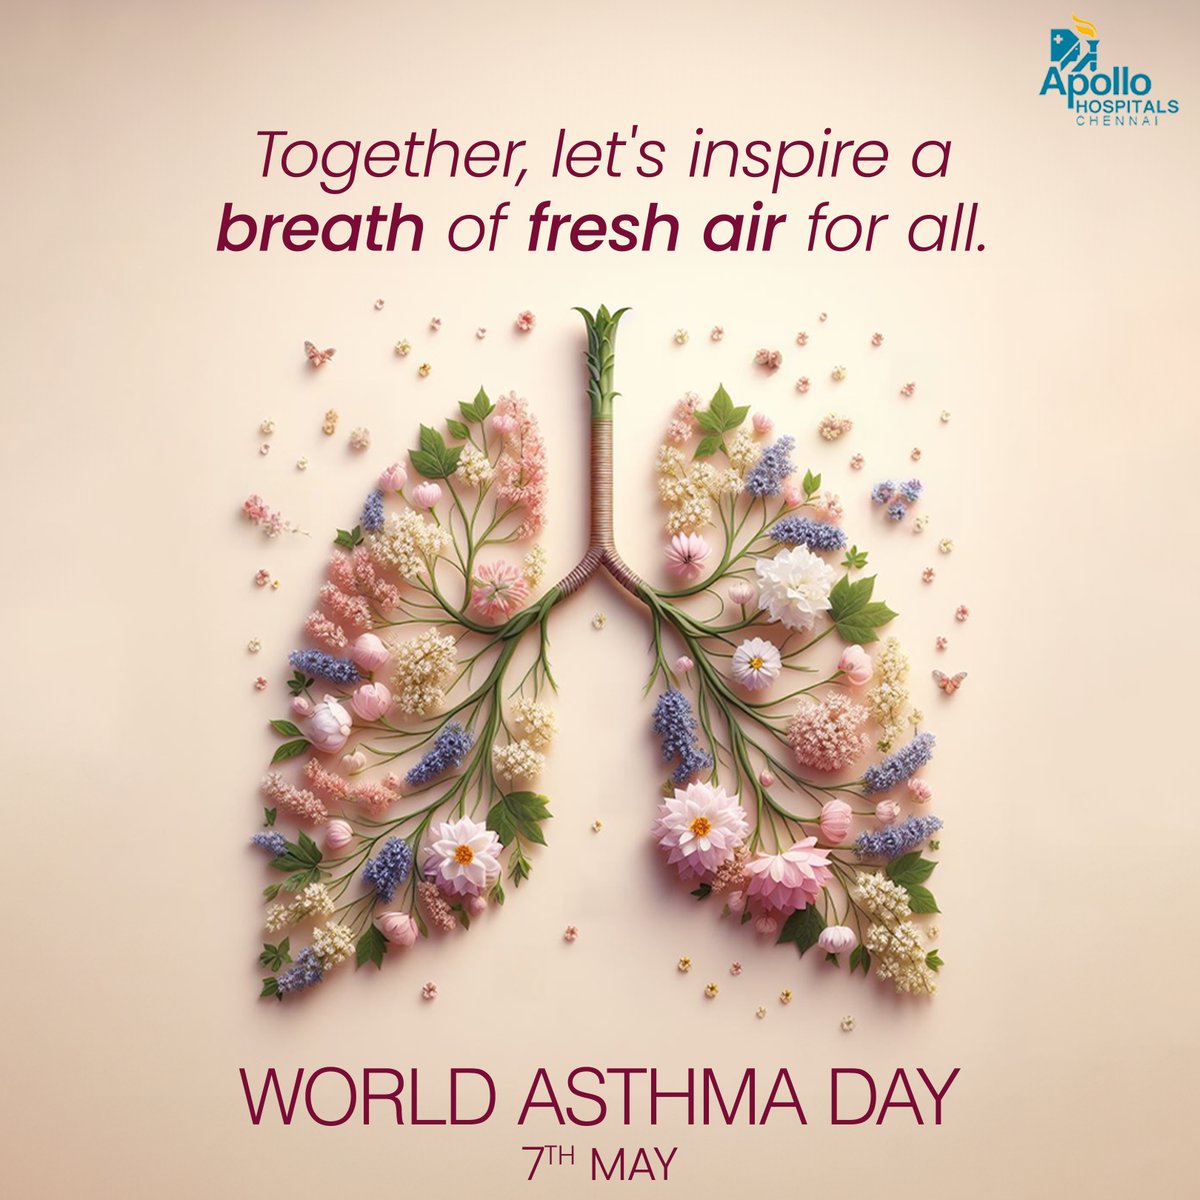 Let's make every breath count! Let's raise awareness and support those living with asthma worldwide. Together, we can breathe life into asthma management and ensure everyone enjoys clean, healthy air.

#WorldAsthmaDay #AsthmaDay #Healthcare #ApolloHospitals